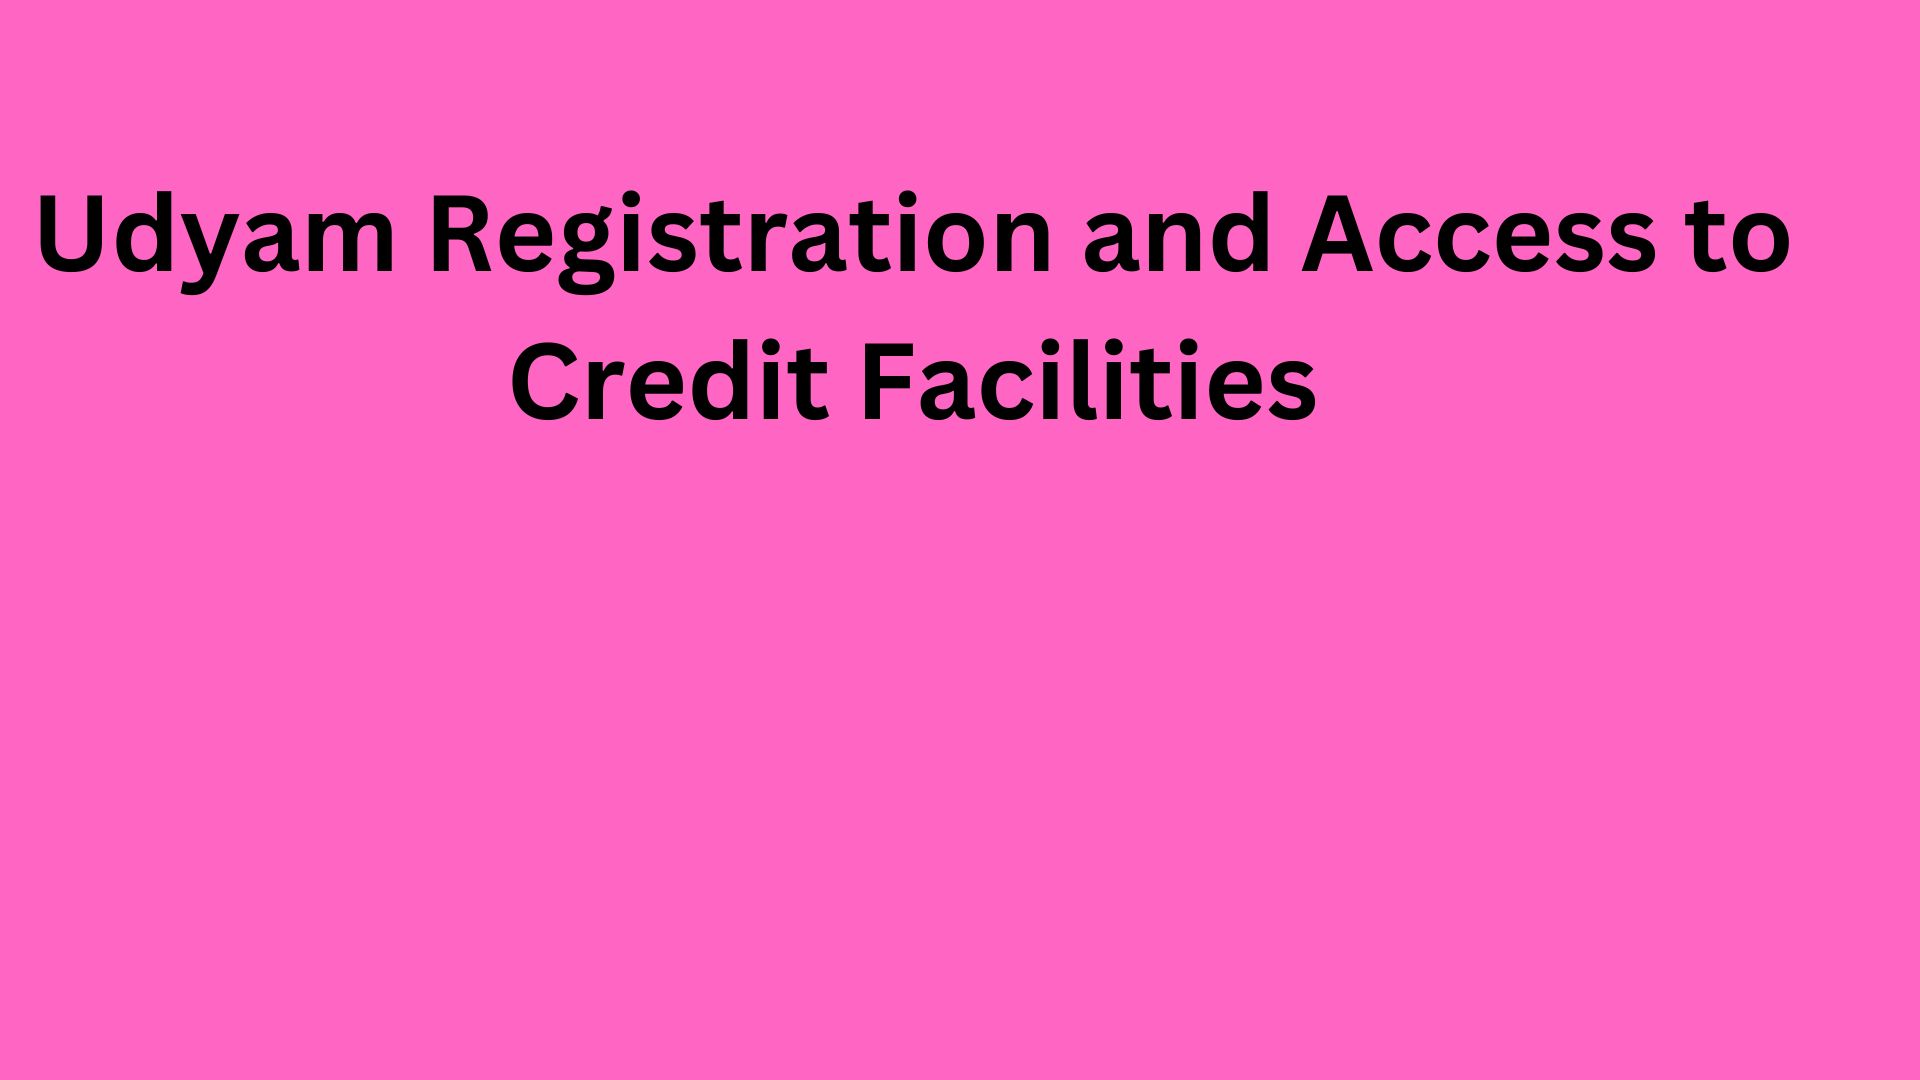 Udyam Registration and Access to Credit Facilities